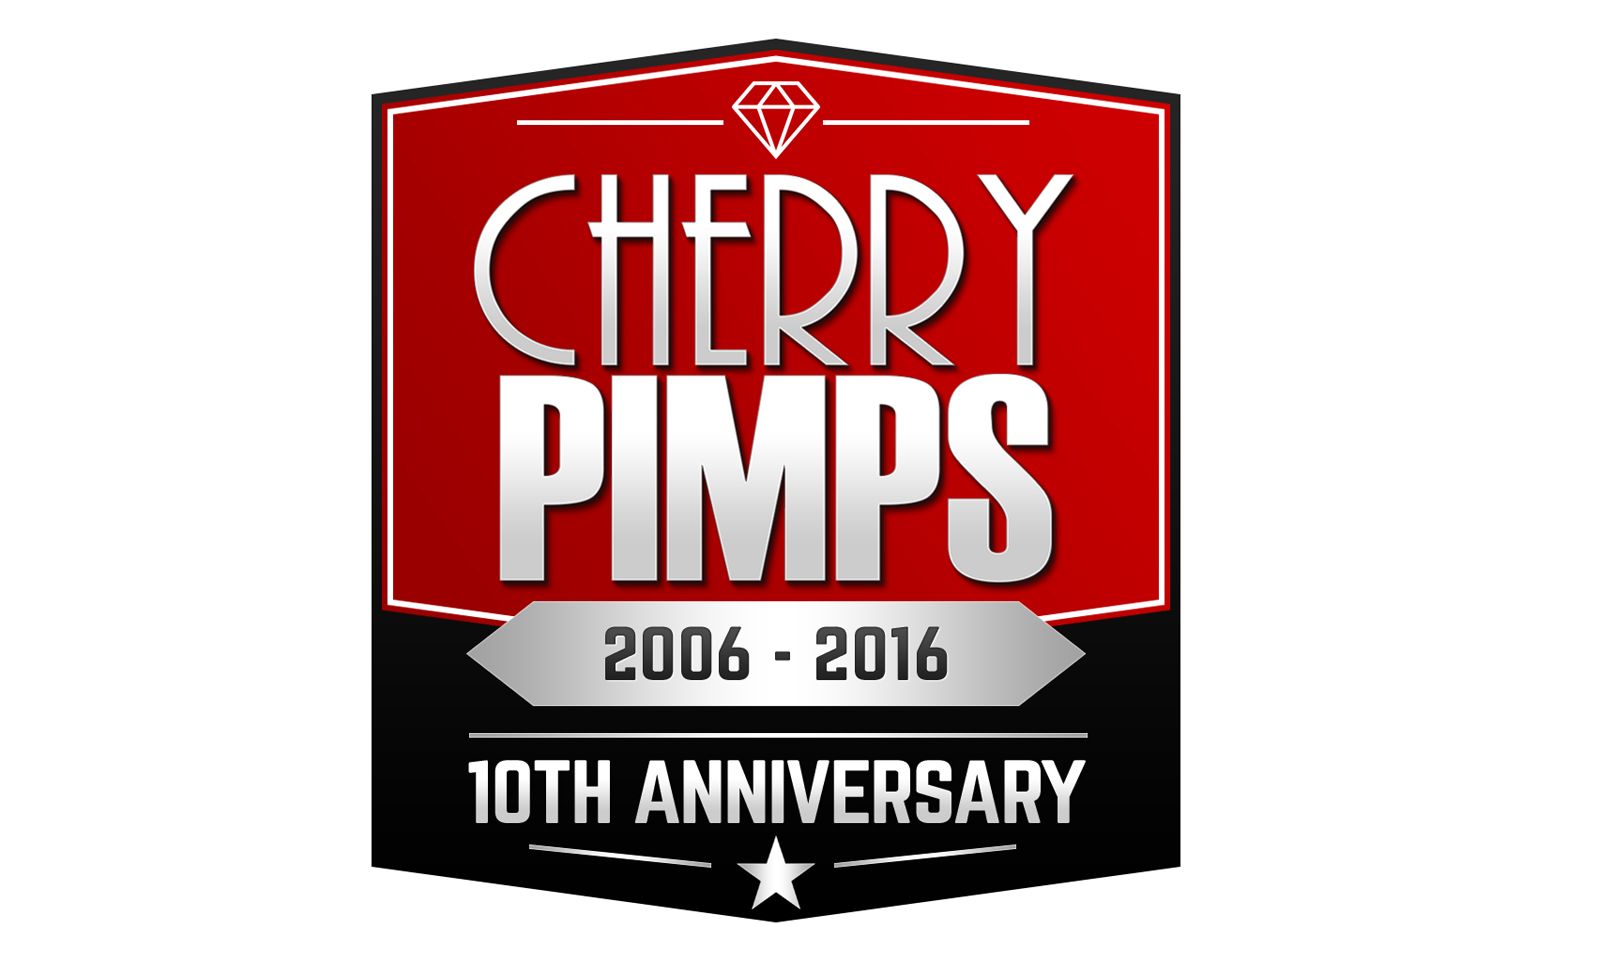 Cherry Pimps Celebrates 10th Anniversary with Dual Site Launch